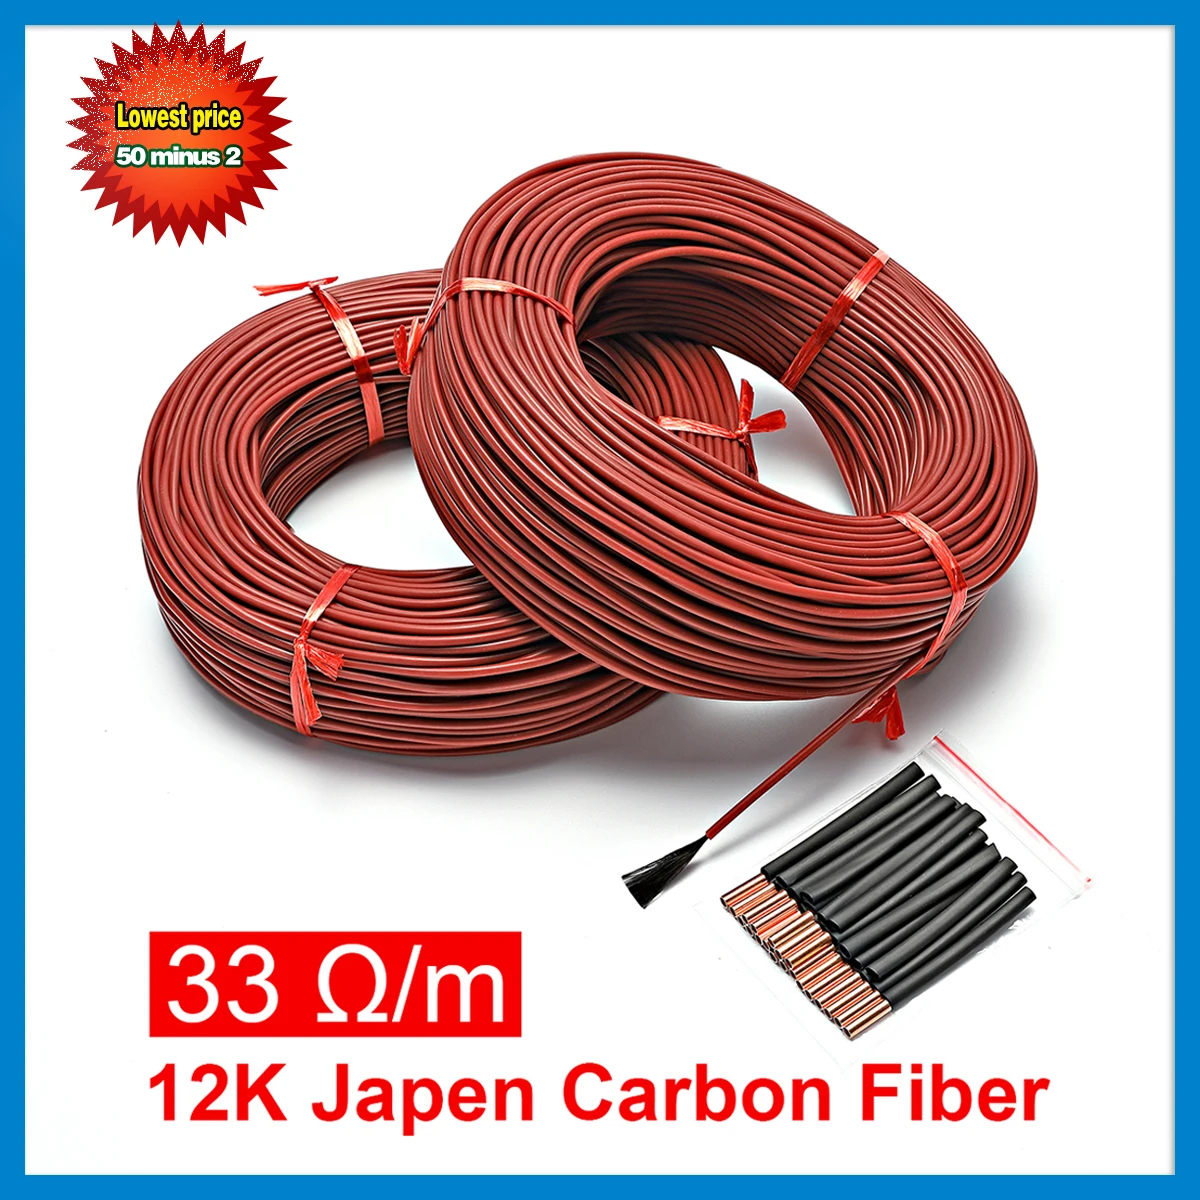 

Infrared Heating Cable 12K 33ohm/m Silicone Carbon Fiber Heating Wire for Warm Floor with Temperature Controller Thermostat